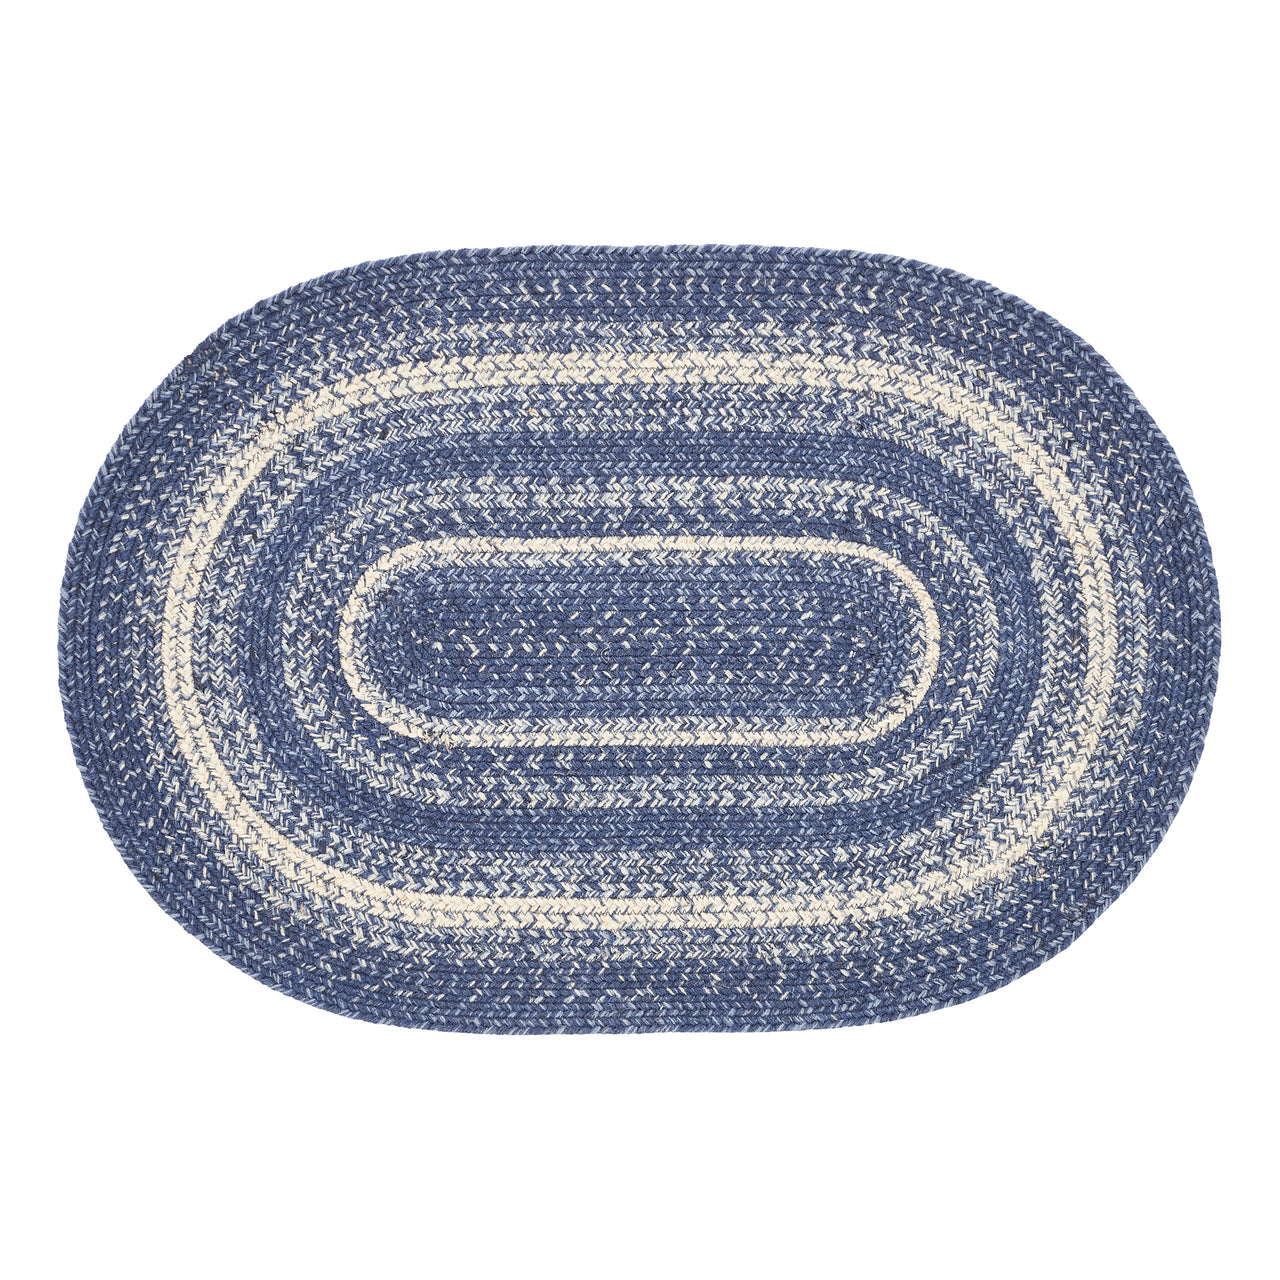 Great Falls Jute Braided Rug Oval with Rug Pad 2'x3' VHC Brands